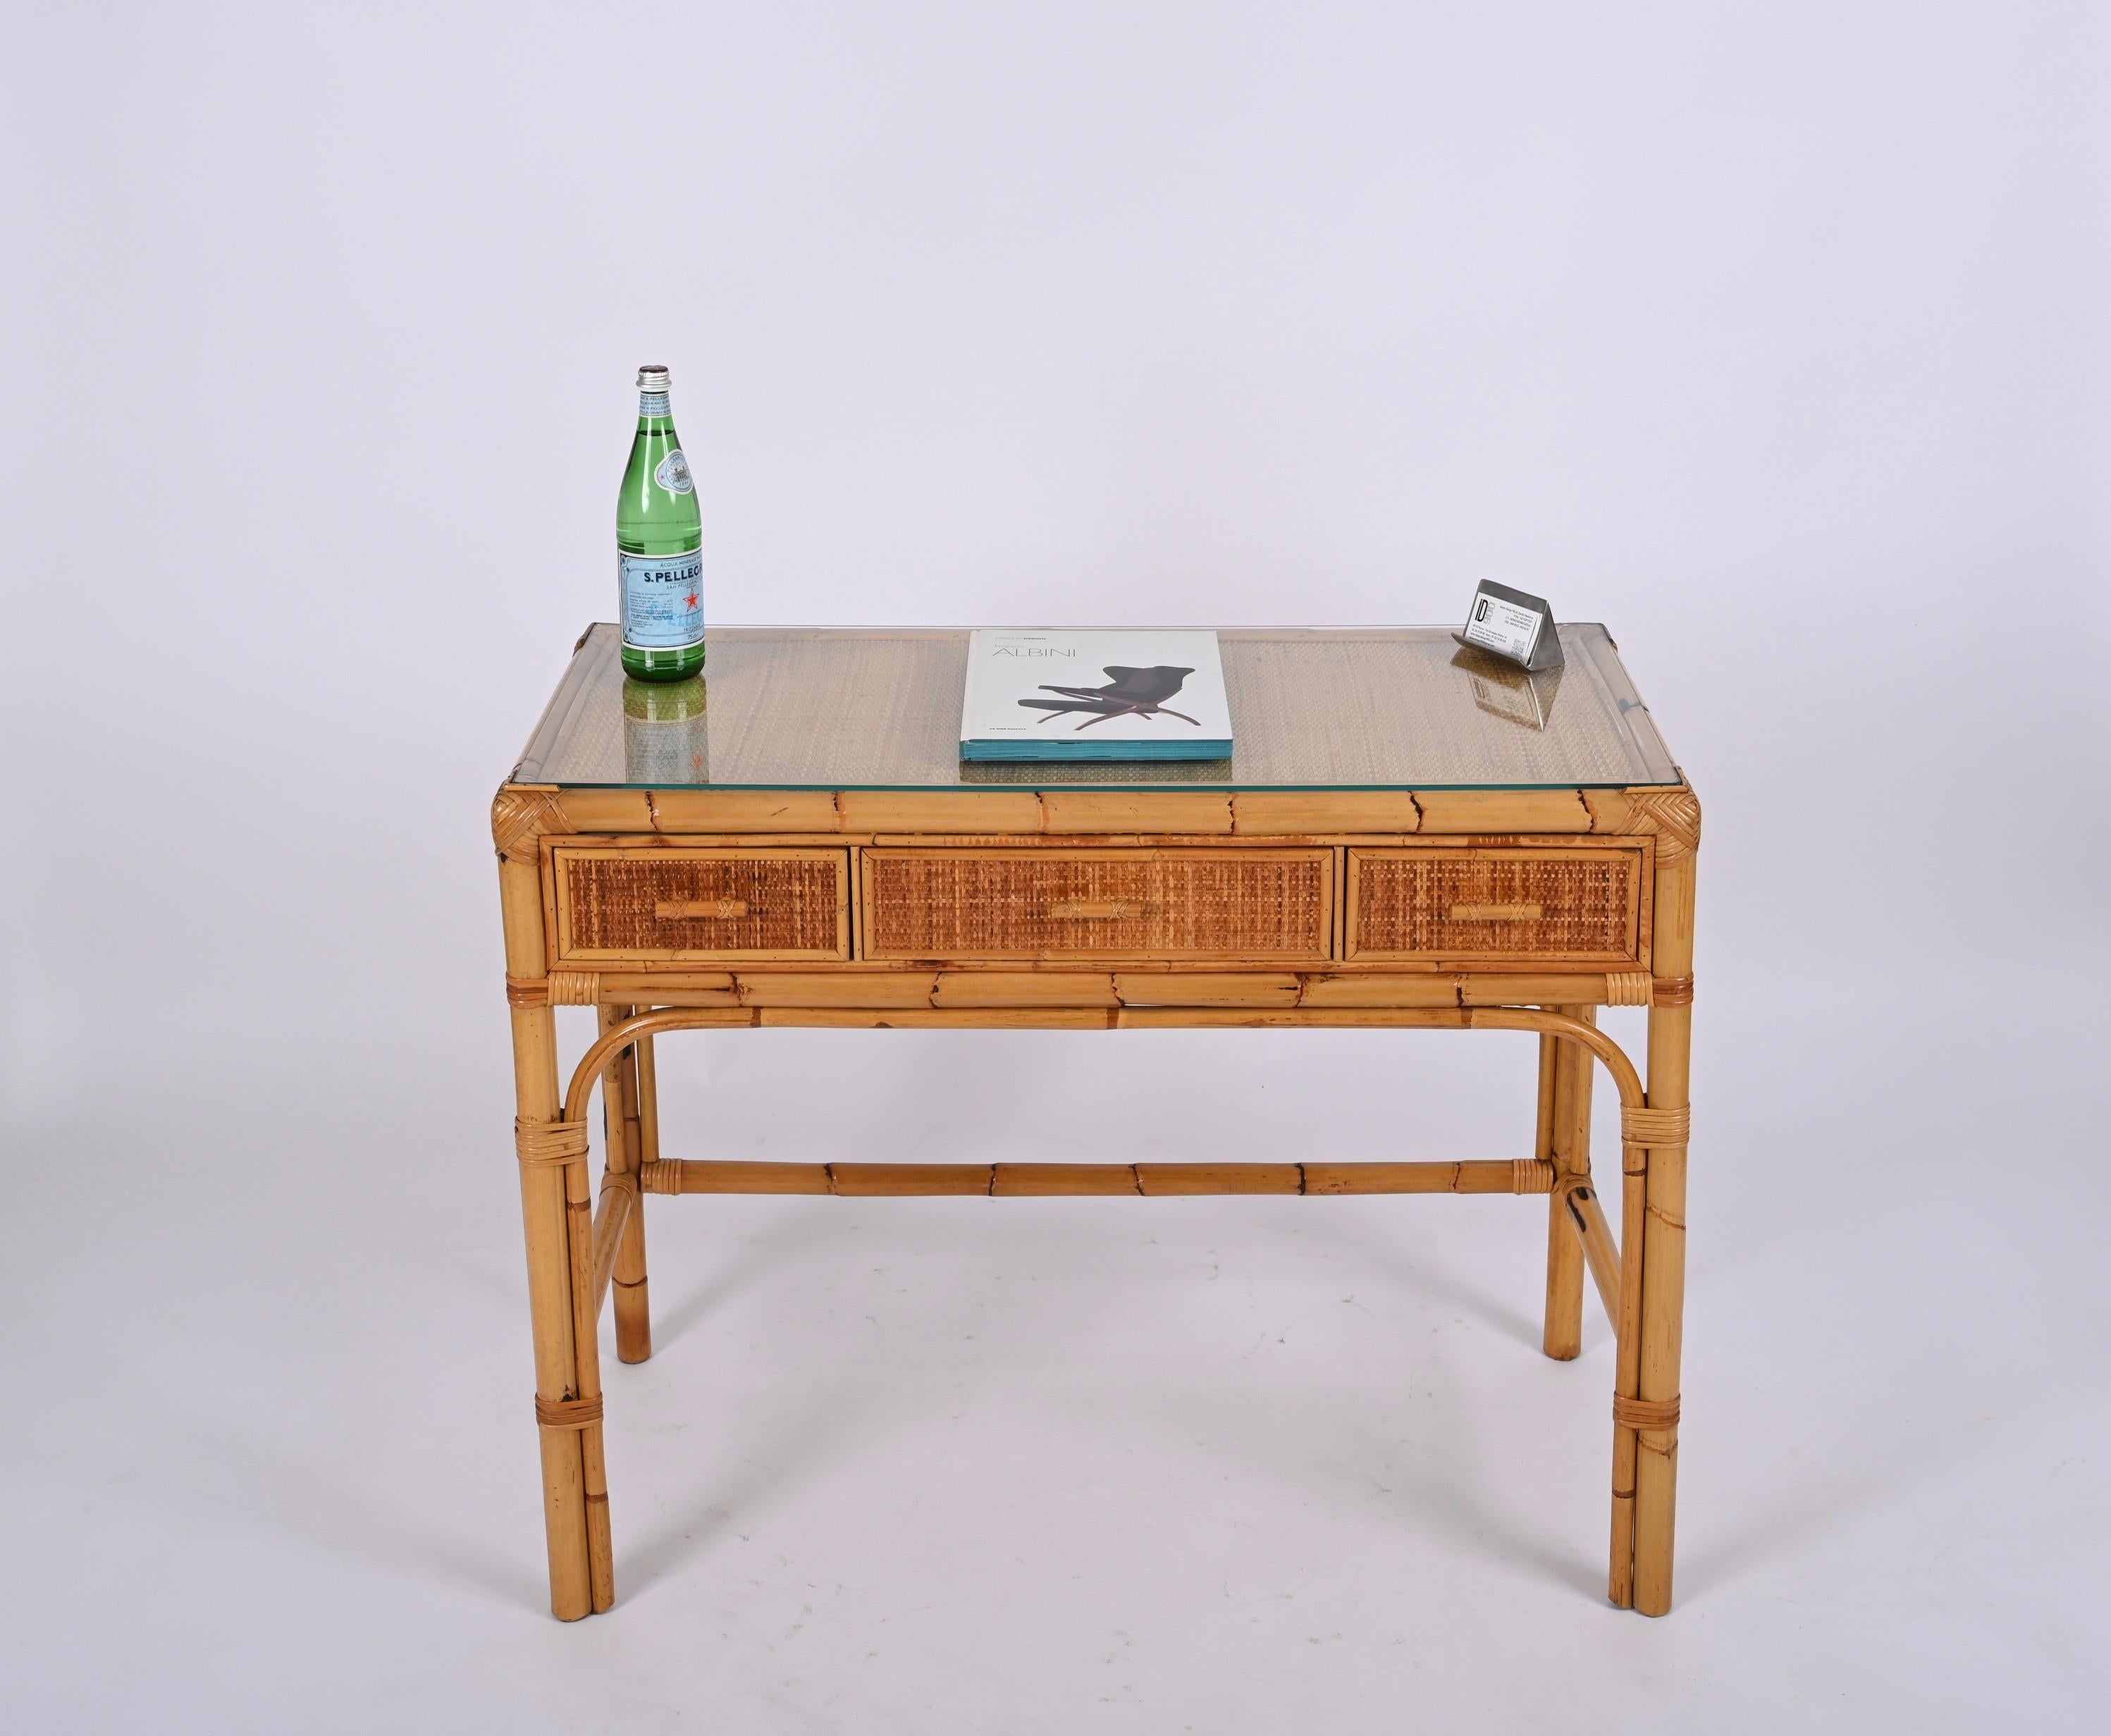 Unique midcentury rectangular bamboo and rattan wicker desk with crystal glass top and three drawers. This excellent piece was designed in Italy during the 1970s.

This stunning desk features a structure in curved bamboo cane enriched by woven